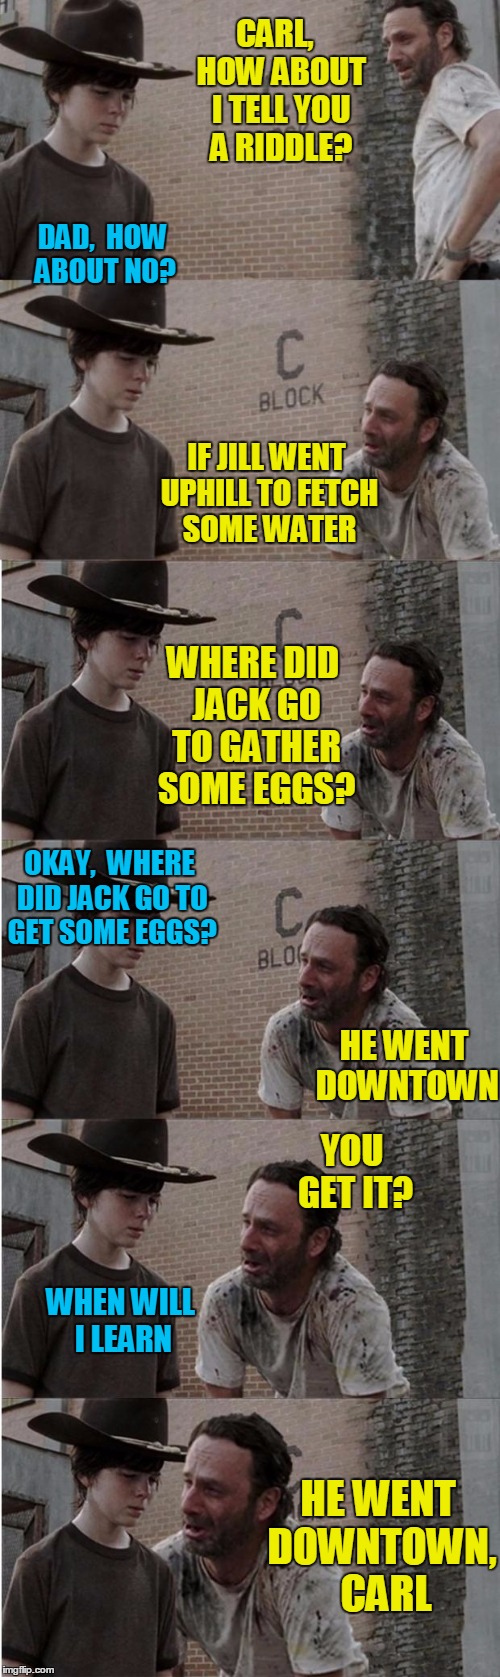 Rick and Carl Longer | CARL,  HOW ABOUT I TELL YOU A RIDDLE? DAD,  HOW ABOUT NO? IF JILL WENT UPHILL TO FETCH SOME WATER; WHERE DID JACK GO TO GATHER SOME EGGS? OKAY,  WHERE DID JACK GO TO GET SOME EGGS? HE WENT DOWNTOWN; YOU GET IT? WHEN WILL I LEARN; HE WENT DOWNTOWN,  CARL | image tagged in memes,rick and carl longer | made w/ Imgflip meme maker